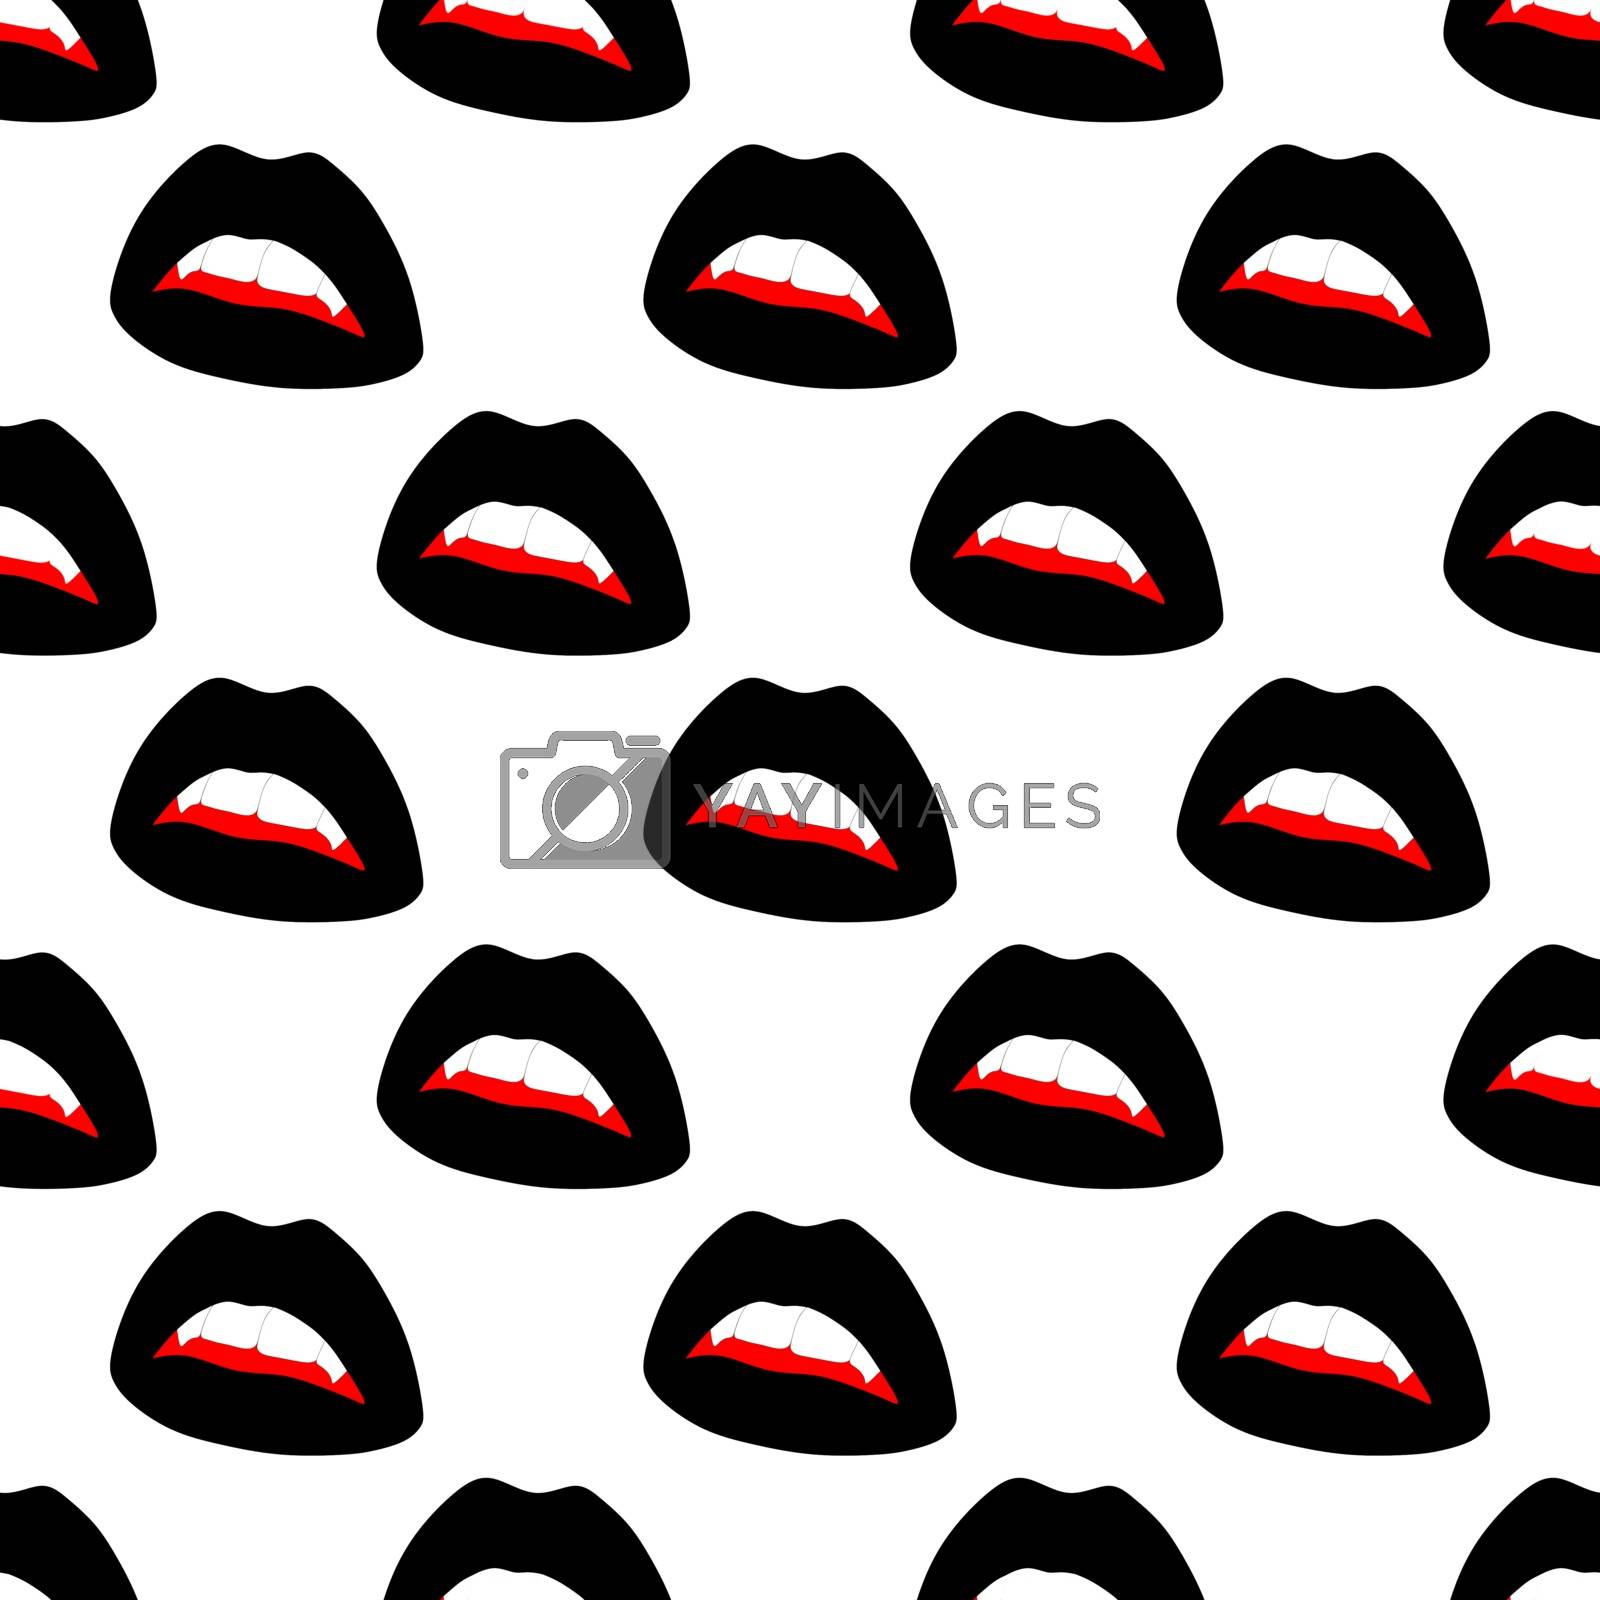 Royalty free image of Seamless pattern made from flat black open lips with vampire fangs. Isolated on white background. Vector stock illustration. by anna_artist